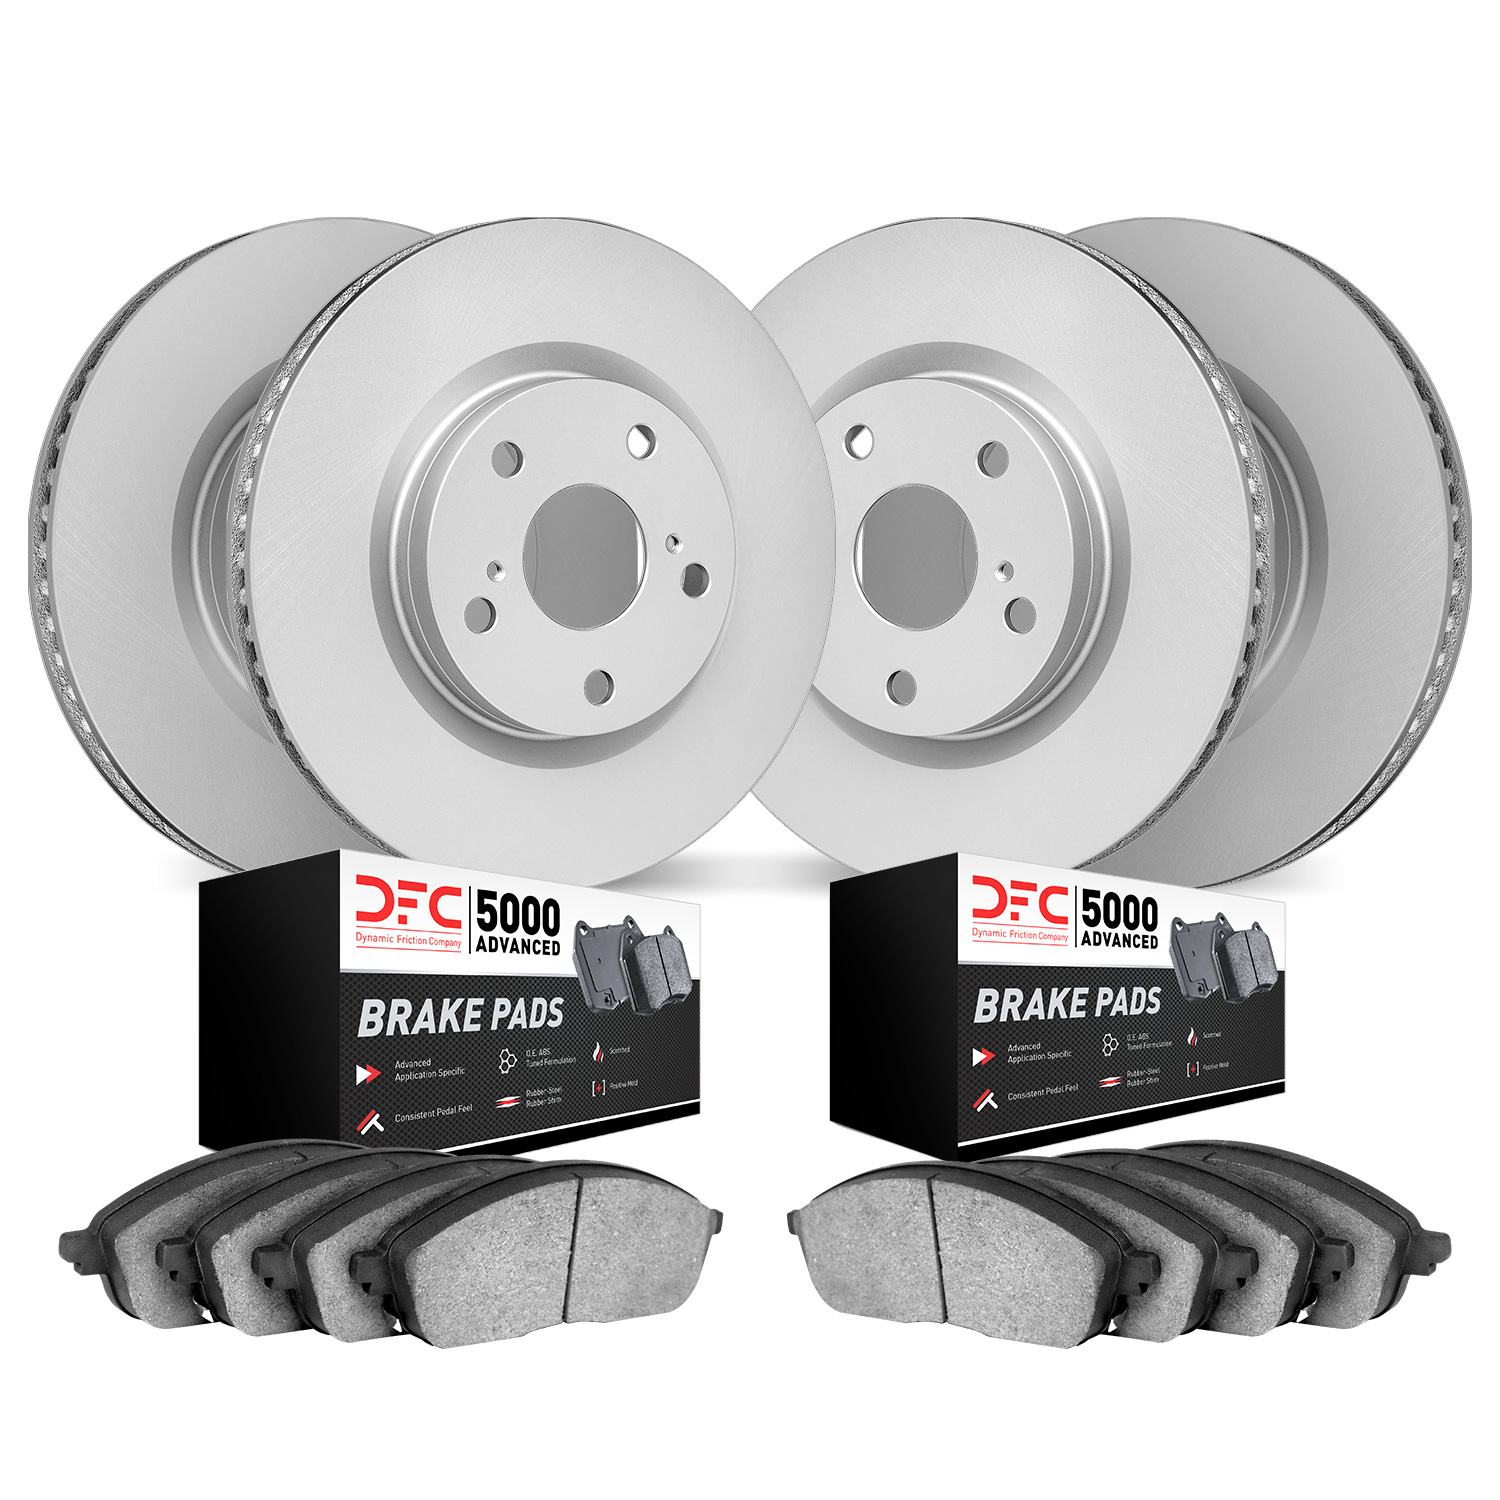 4504-73071 Geospec Brake Rotors w/5000 Advanced Brake Pads Kit, Fits Select Audi/Volkswagen, Position: Front and Rear